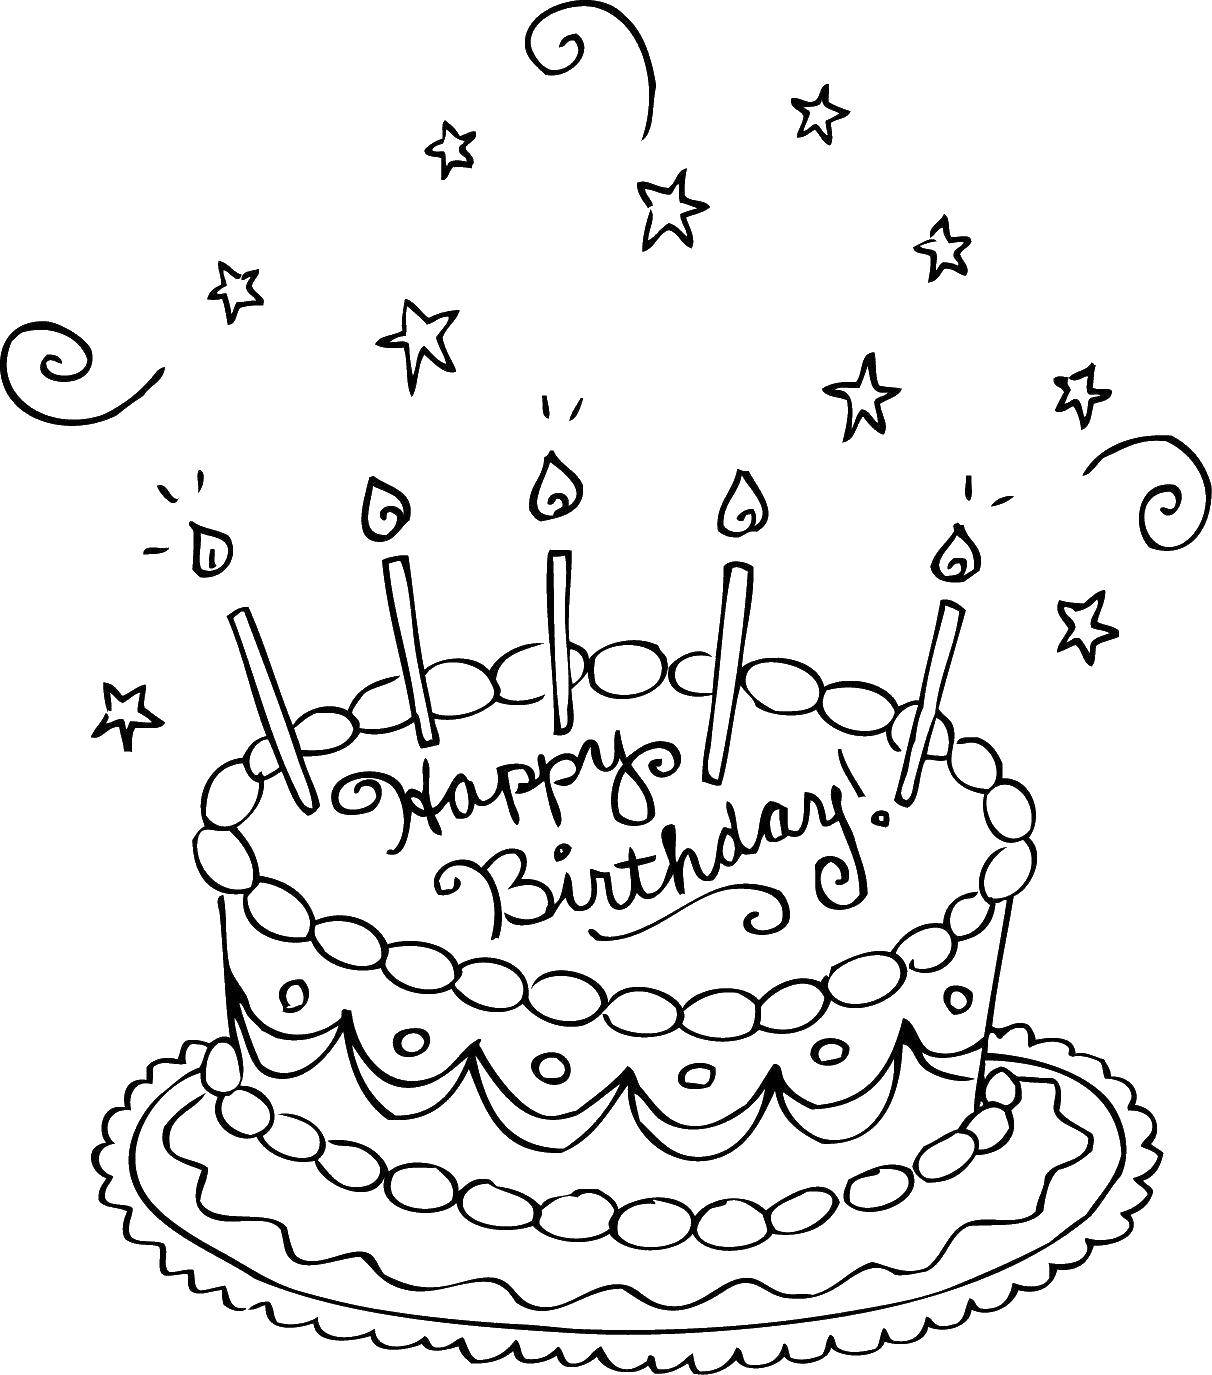 Coloring Cake and five candles. Category cakes. Tags:  candles , cake, stars.